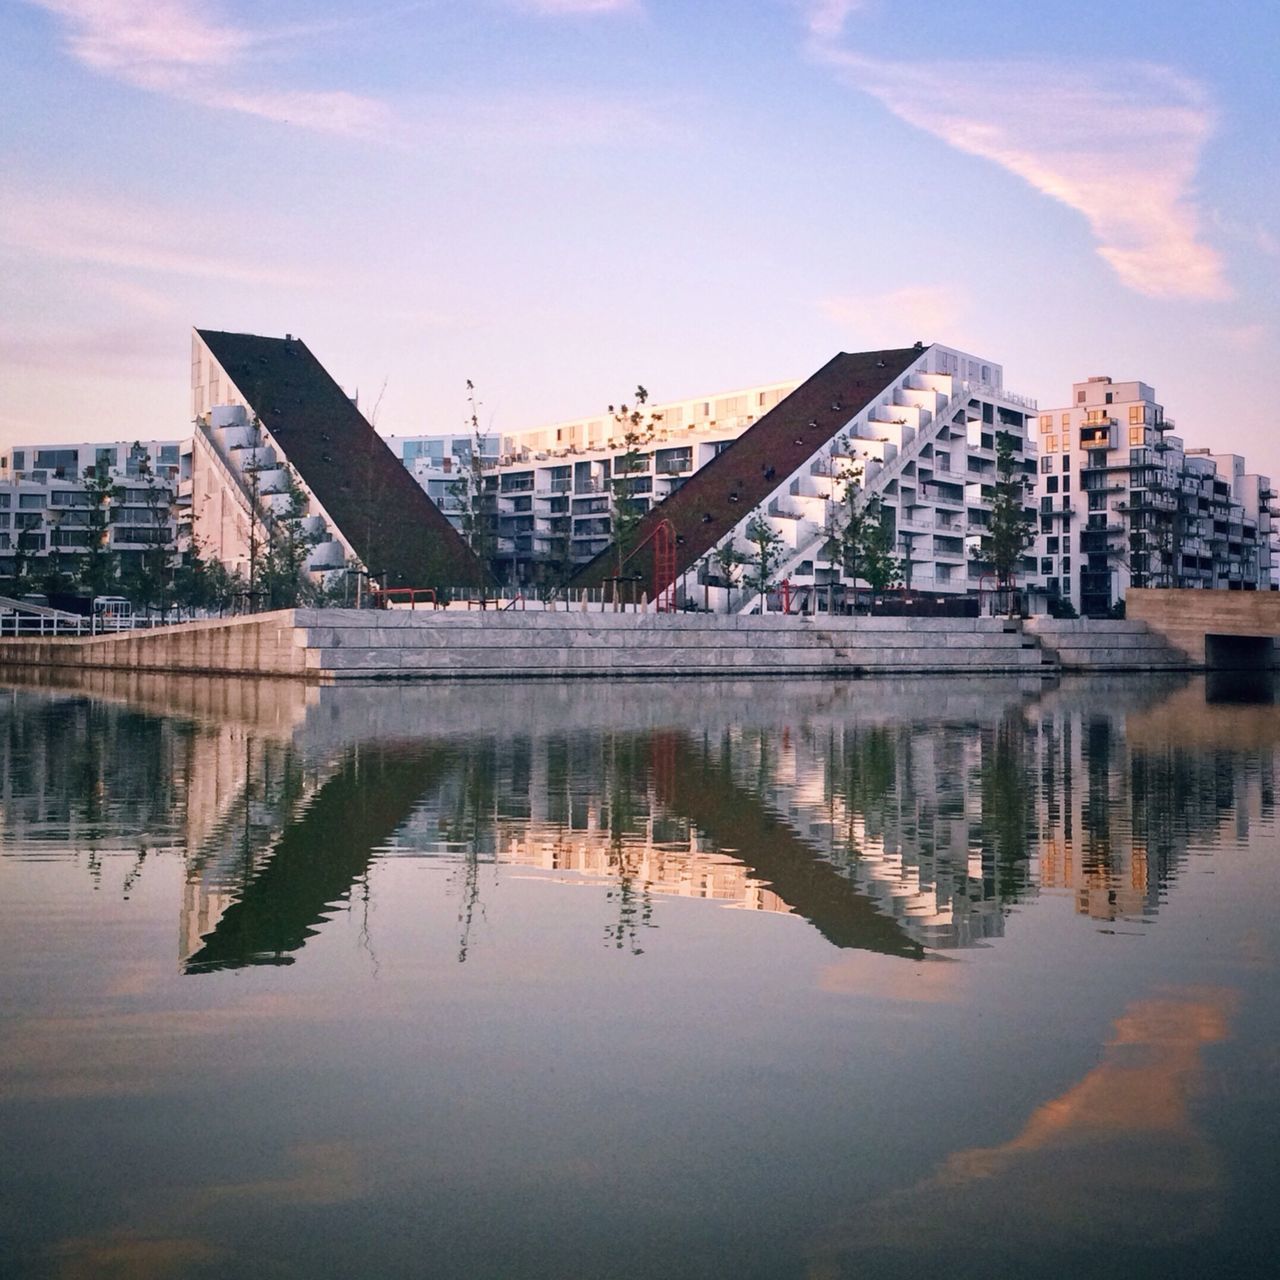 architecture, built structure, reflection, building exterior, water, waterfront, sky, city, river, cloud - sky, lake, standing water, cloud, sunset, outdoors, no people, building, skyscraper, symmetry, modern